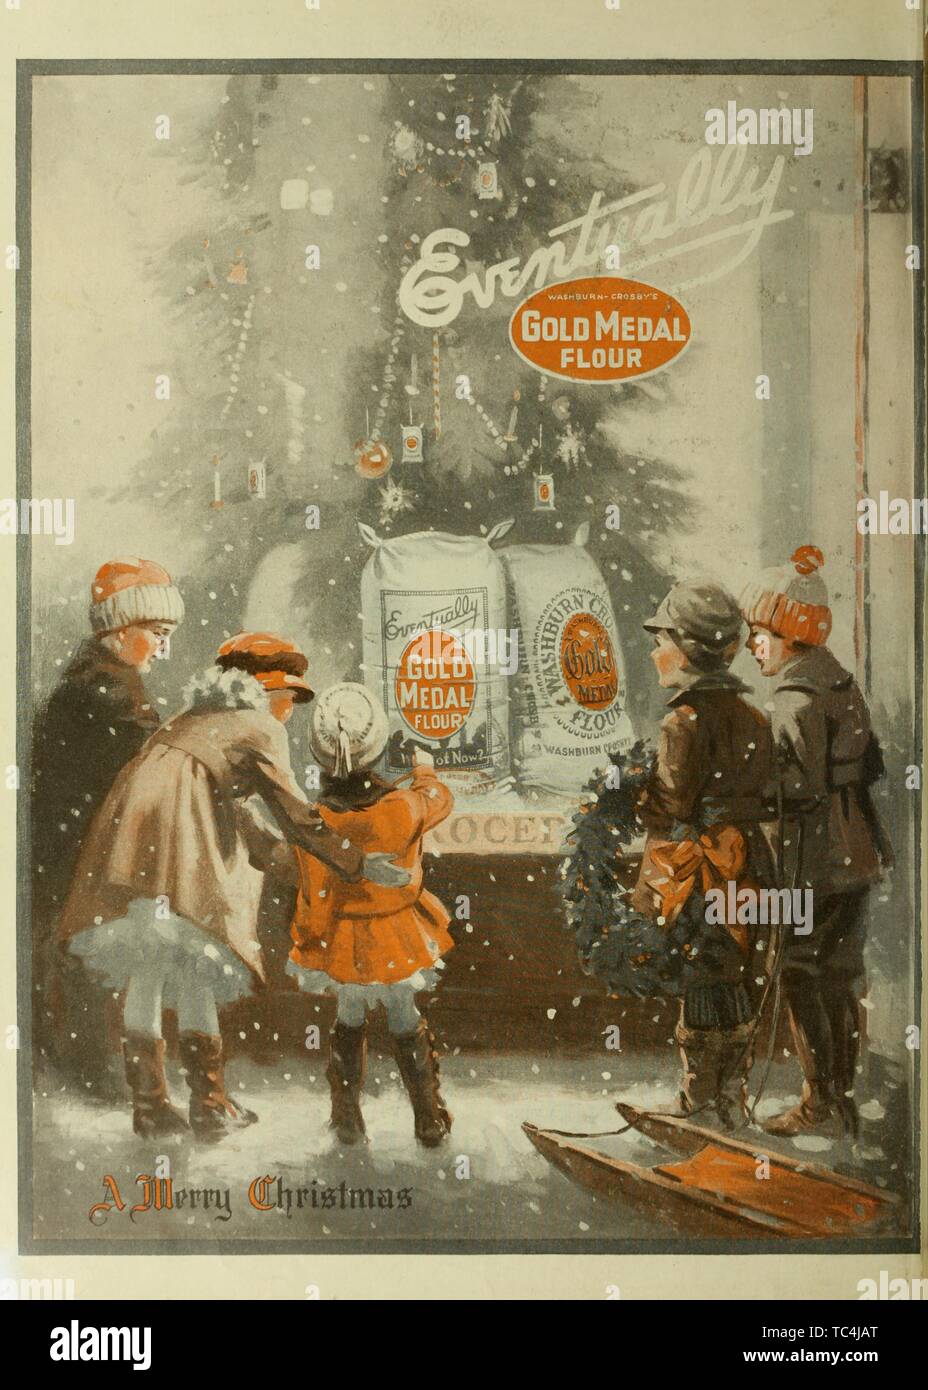 https://c8.alamy.com/comp/TC4JAT/illustrated-drawing-of-children-gazing-at-gold-medal-flour-store-window-on-christmas-night-from-the-saturday-evening-post-1839-courtesy-internet-archive-TC4JAT.jpg